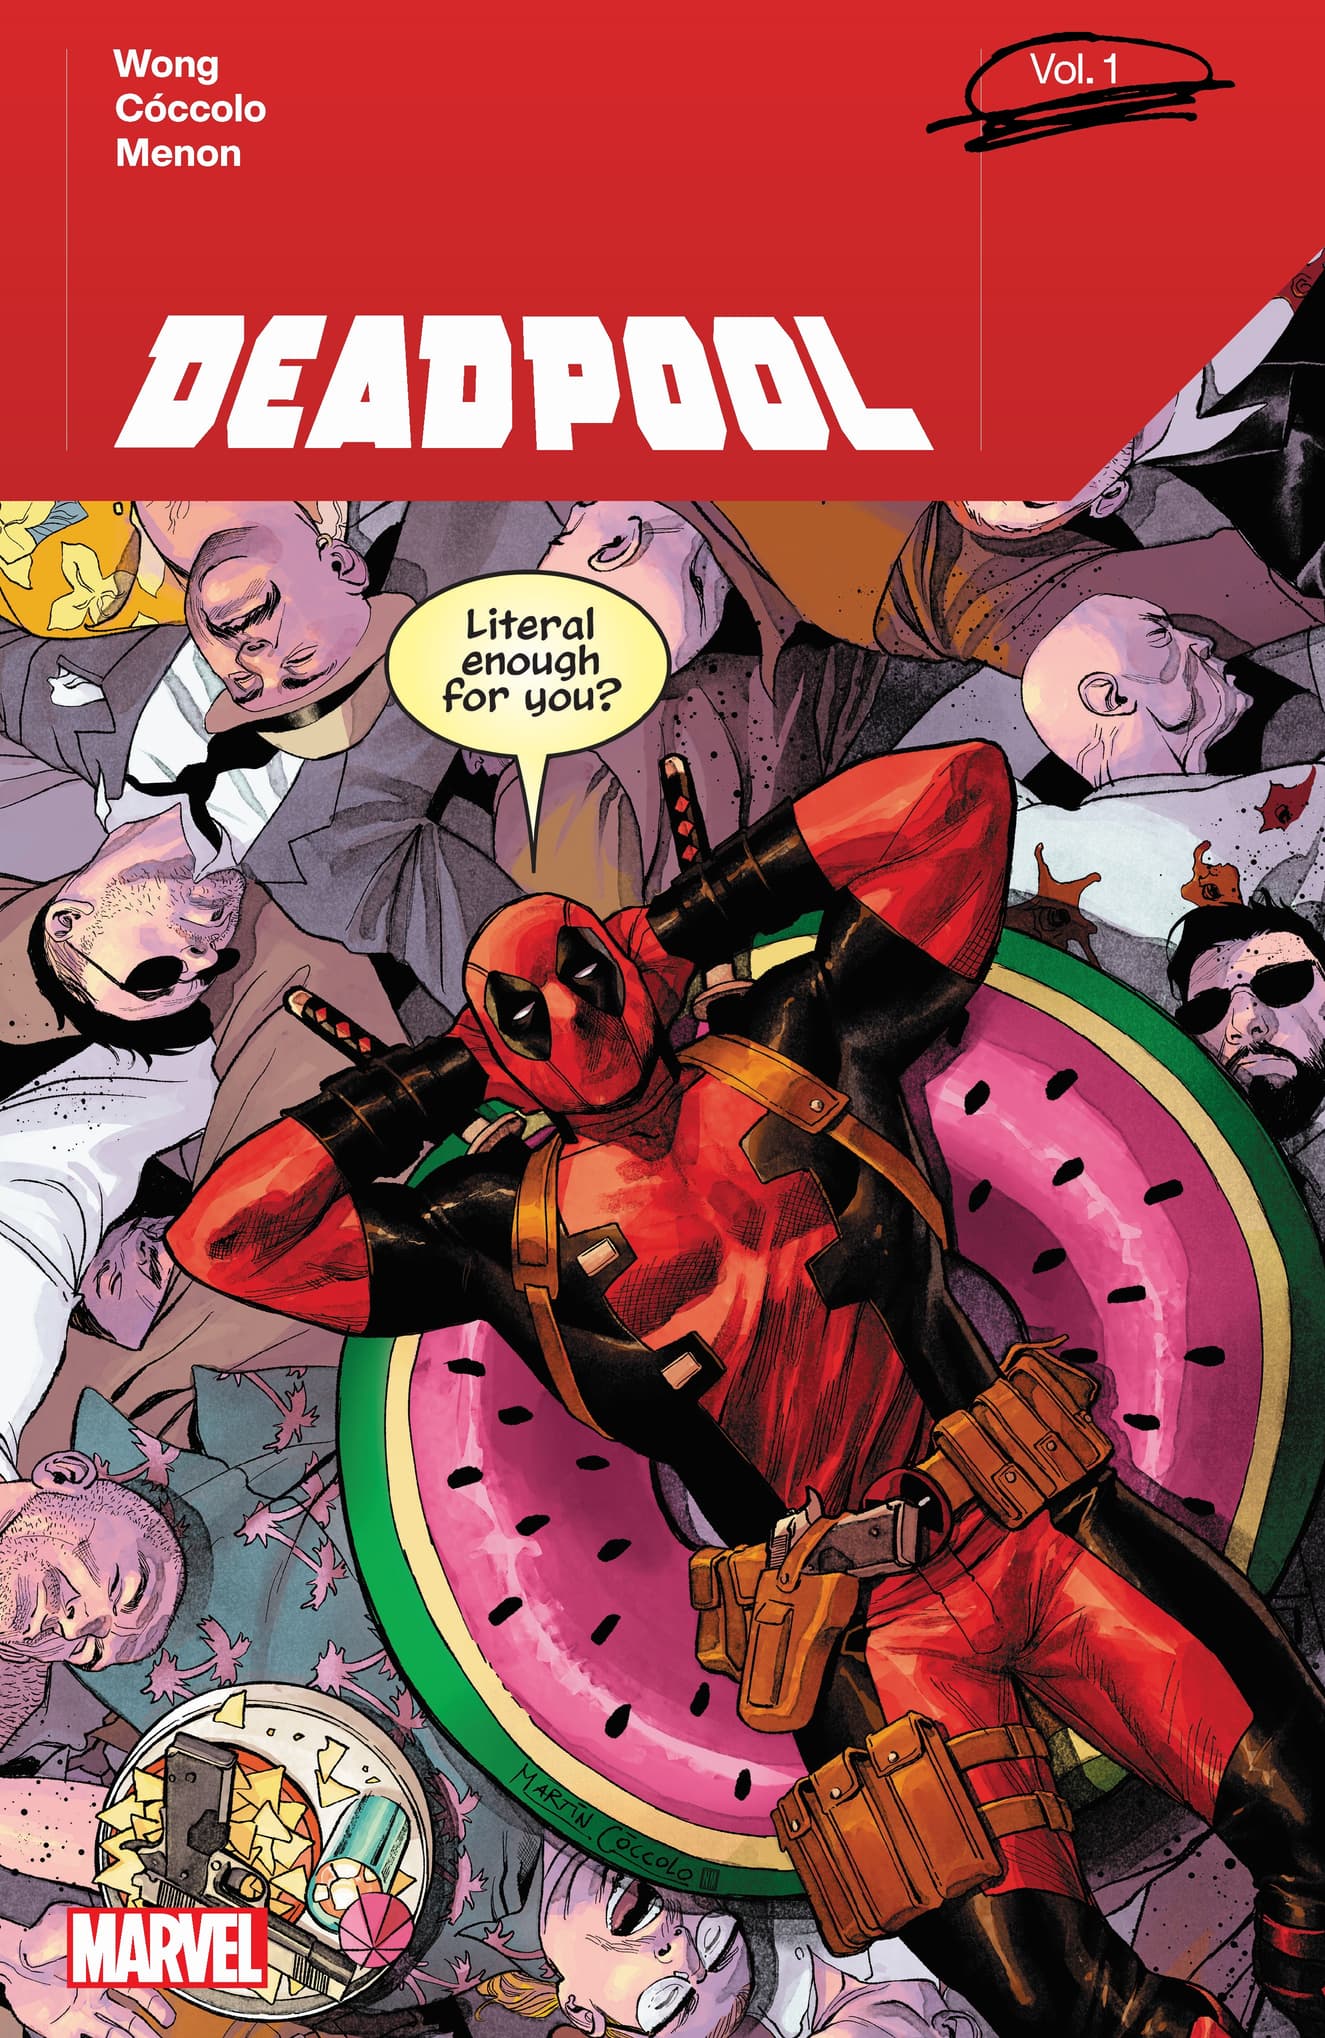 DEADPOOL BY ALYSSA WONG VOL. 1 cover by Martin Coccolo